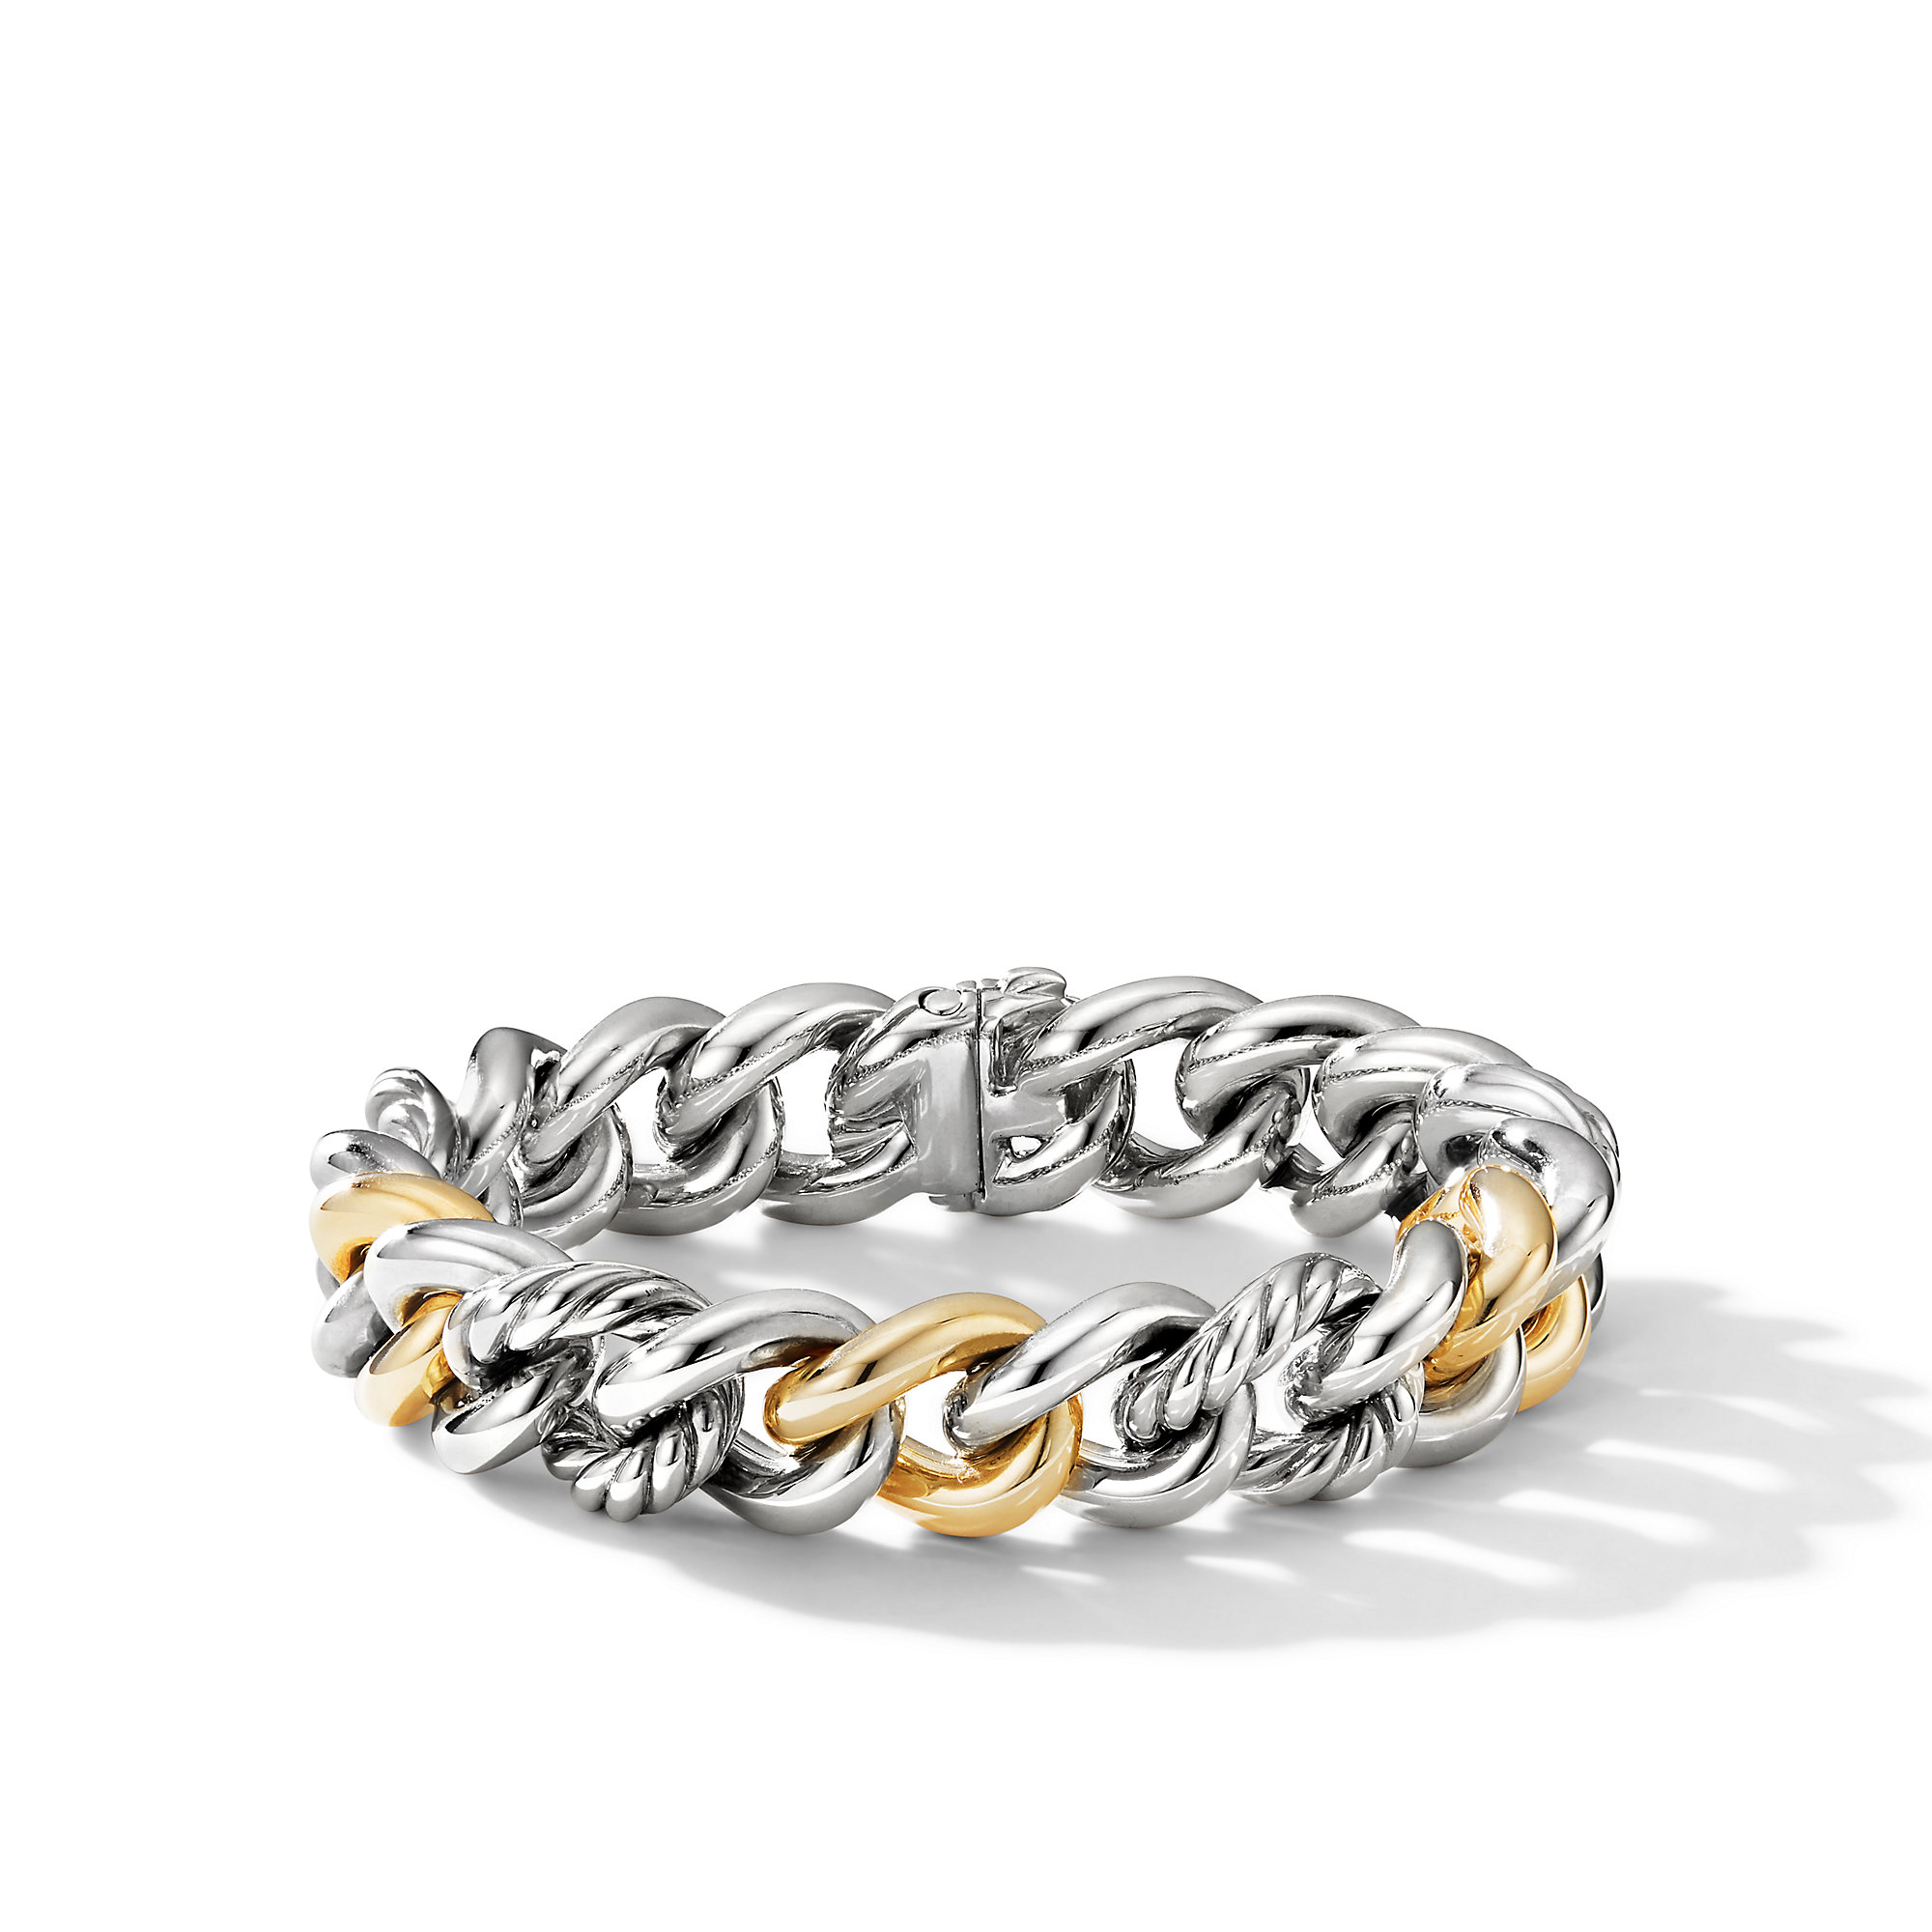 Curb Chain Bracelet in Sterling Silver with 18K Yellow Gold